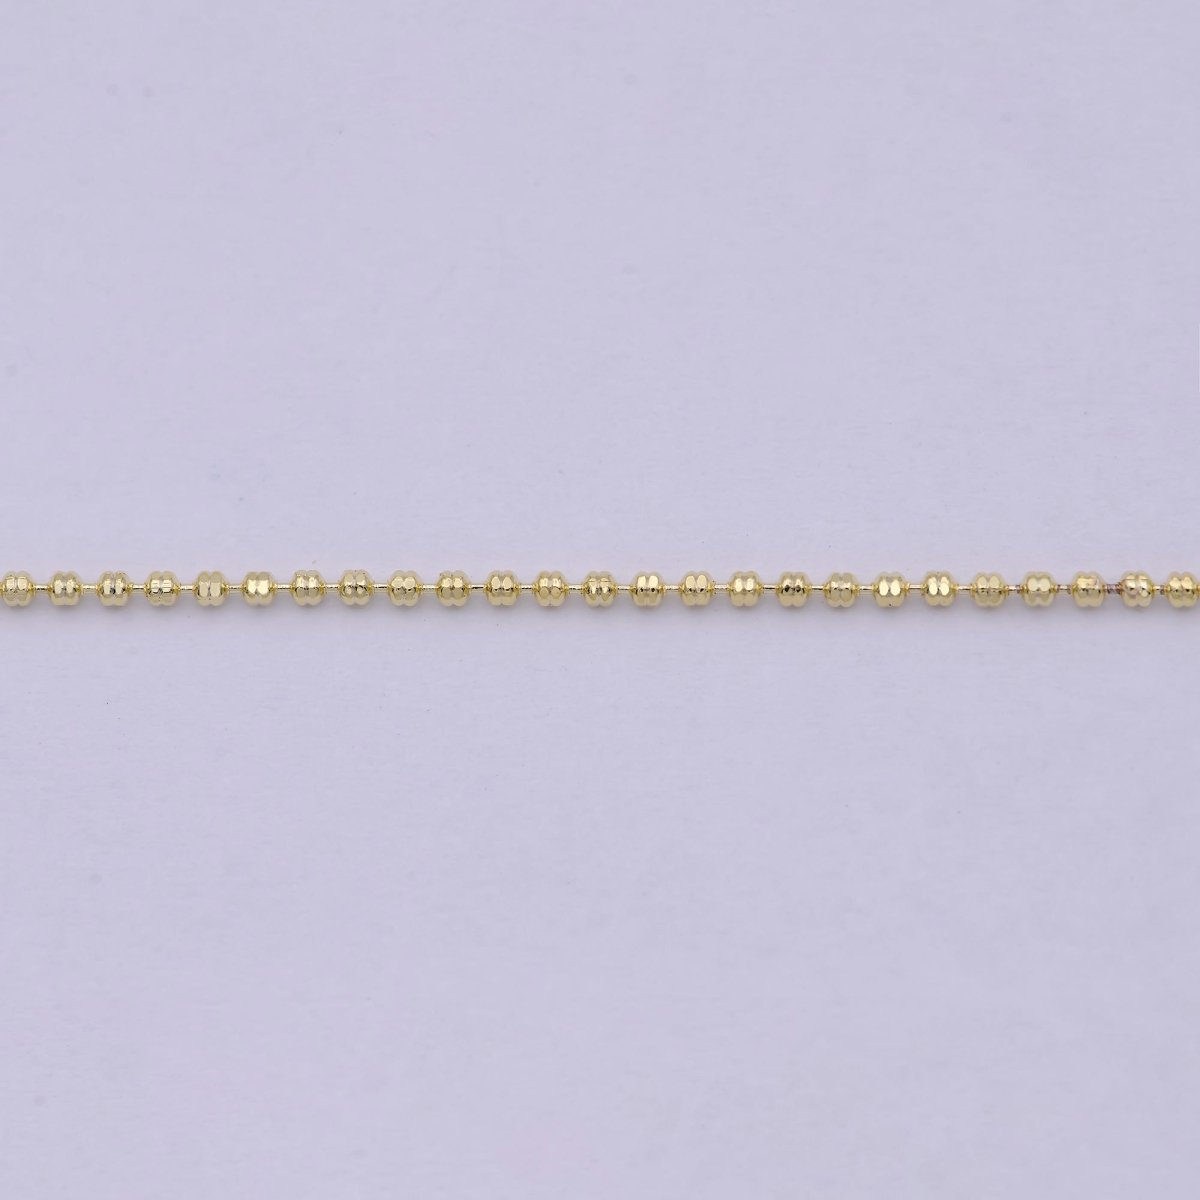 18 Inches Beaded Chain Necklace 14K Gold Filled Finished Chain Necklace, Dainty 1.1mm Bead Necklace w/ Spring Ring | WA-533 Clearance Pricing - DLUXCA